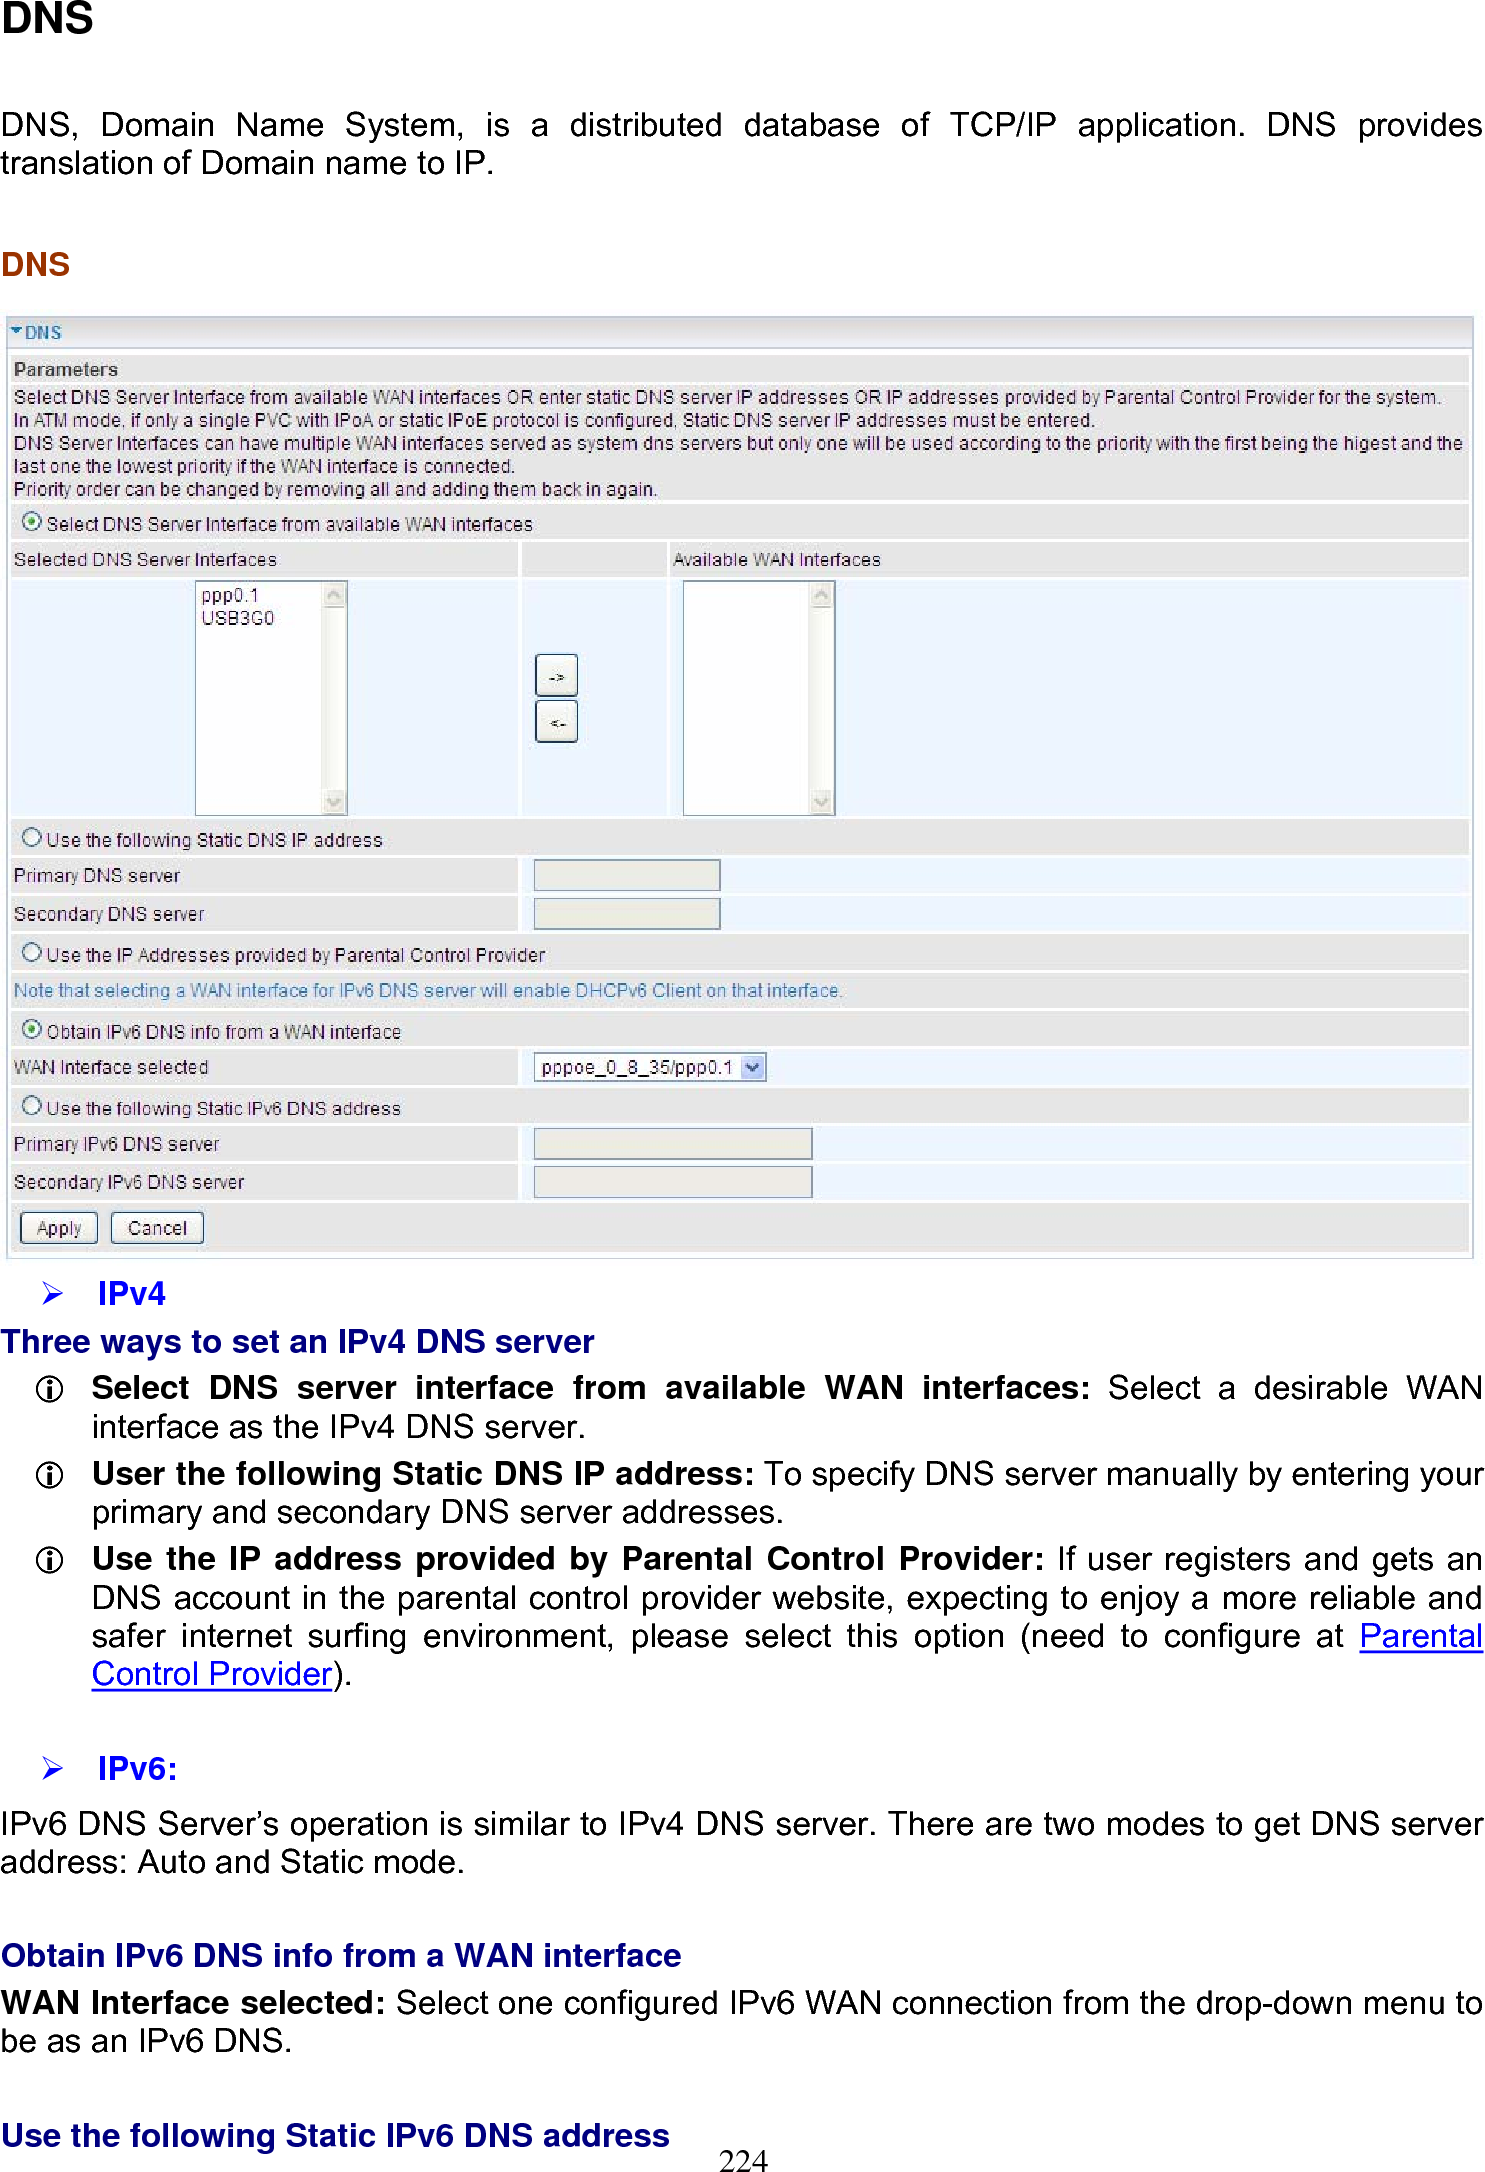 224 DNS  DNS, Domain Name System, is a distributed database of TCP/IP application. DNS provides translation of Domain name to IP.   DNS   ¾ IPv4 Three ways to set an IPv4 DNS server L Select DNS server interface from available WAN interfaces: Select a desirable WAN interface as the IPv4 DNS server. L User the following Static DNS IP address: To specify DNS server manually by entering your primary and secondary DNS server addresses. L Use the IP address provided by Parental Control Provider: If user registers and gets an DNS account in the parental control provider website, expecting to enjoy a more reliable and safer internet surfing environment, please select this option (need to configure at Parental Control Provider).  ¾ IPv6: IPv6 DNS Server’s operation is similar to IPv4 DNS server. There are two modes to get DNS server address: Auto and Static mode.  Obtain IPv6 DNS info from a WAN interface WAN Interface selected: Select one configured IPv6 WAN connection from the drop-down menu to be as an IPv6 DNS.   Use the following Static IPv6 DNS address 